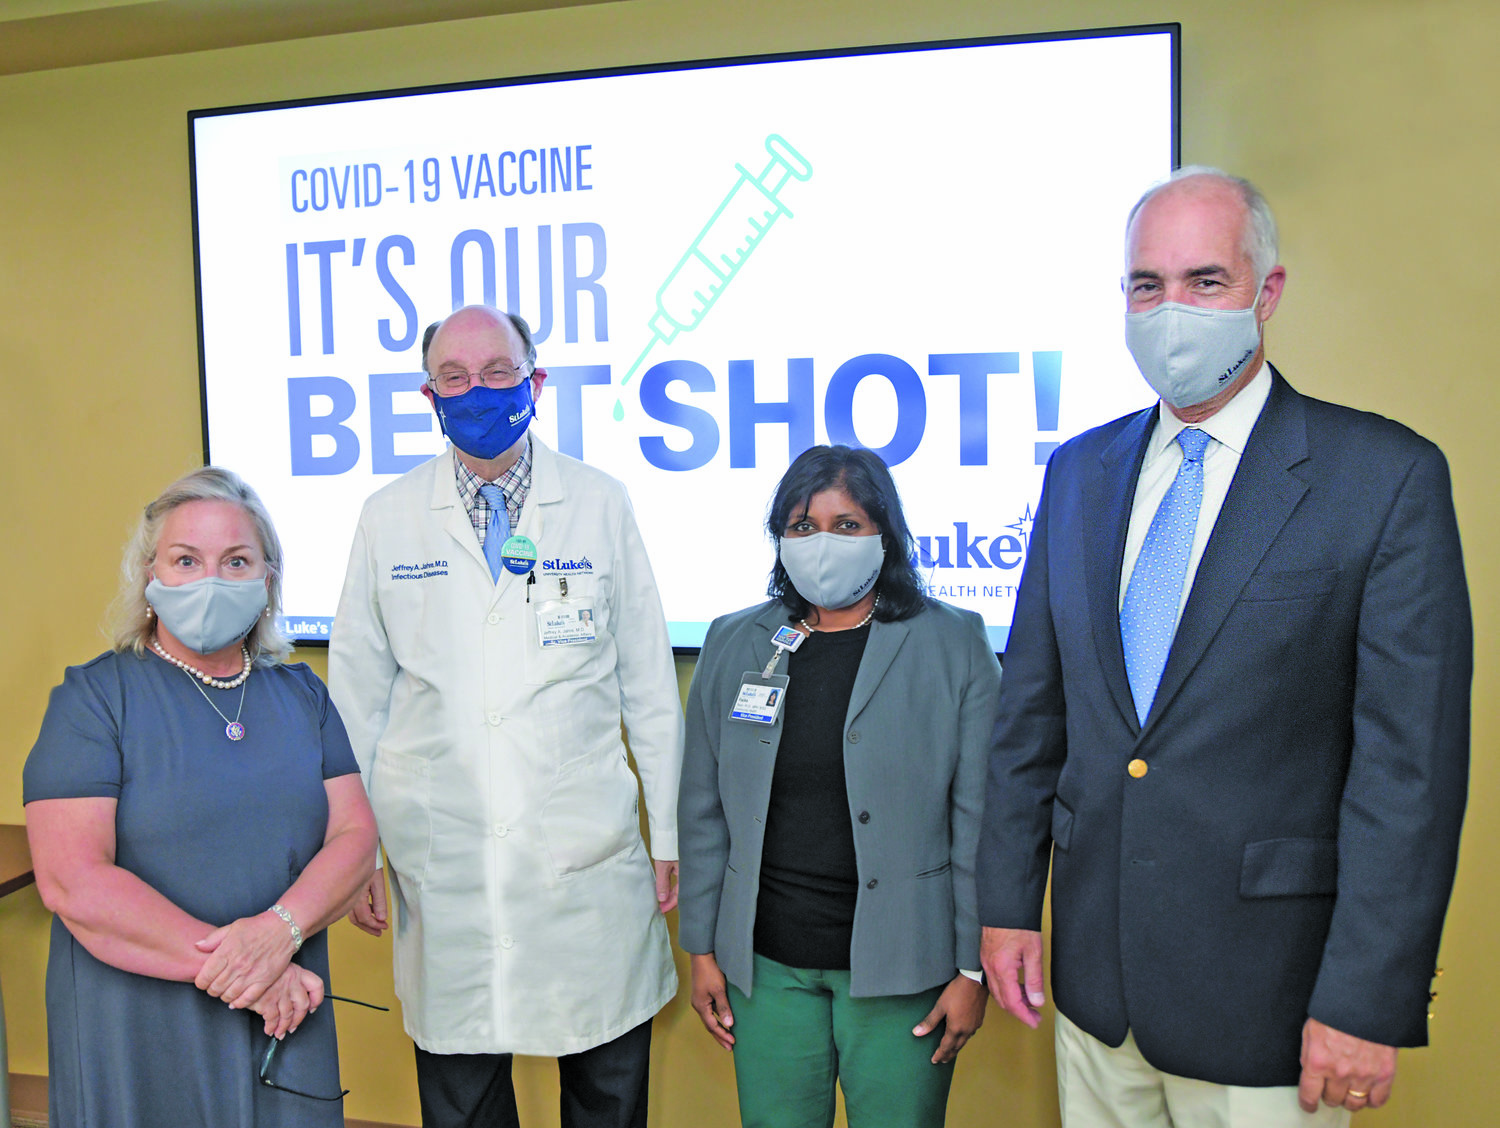 From left: U.S. Rep. Susan Wild; Dr. Jeffrey Jahre, senior vice president of medical and academic affairs; Rajika Reed, vice president of community health; and U.S. Sen. Bob Casey.